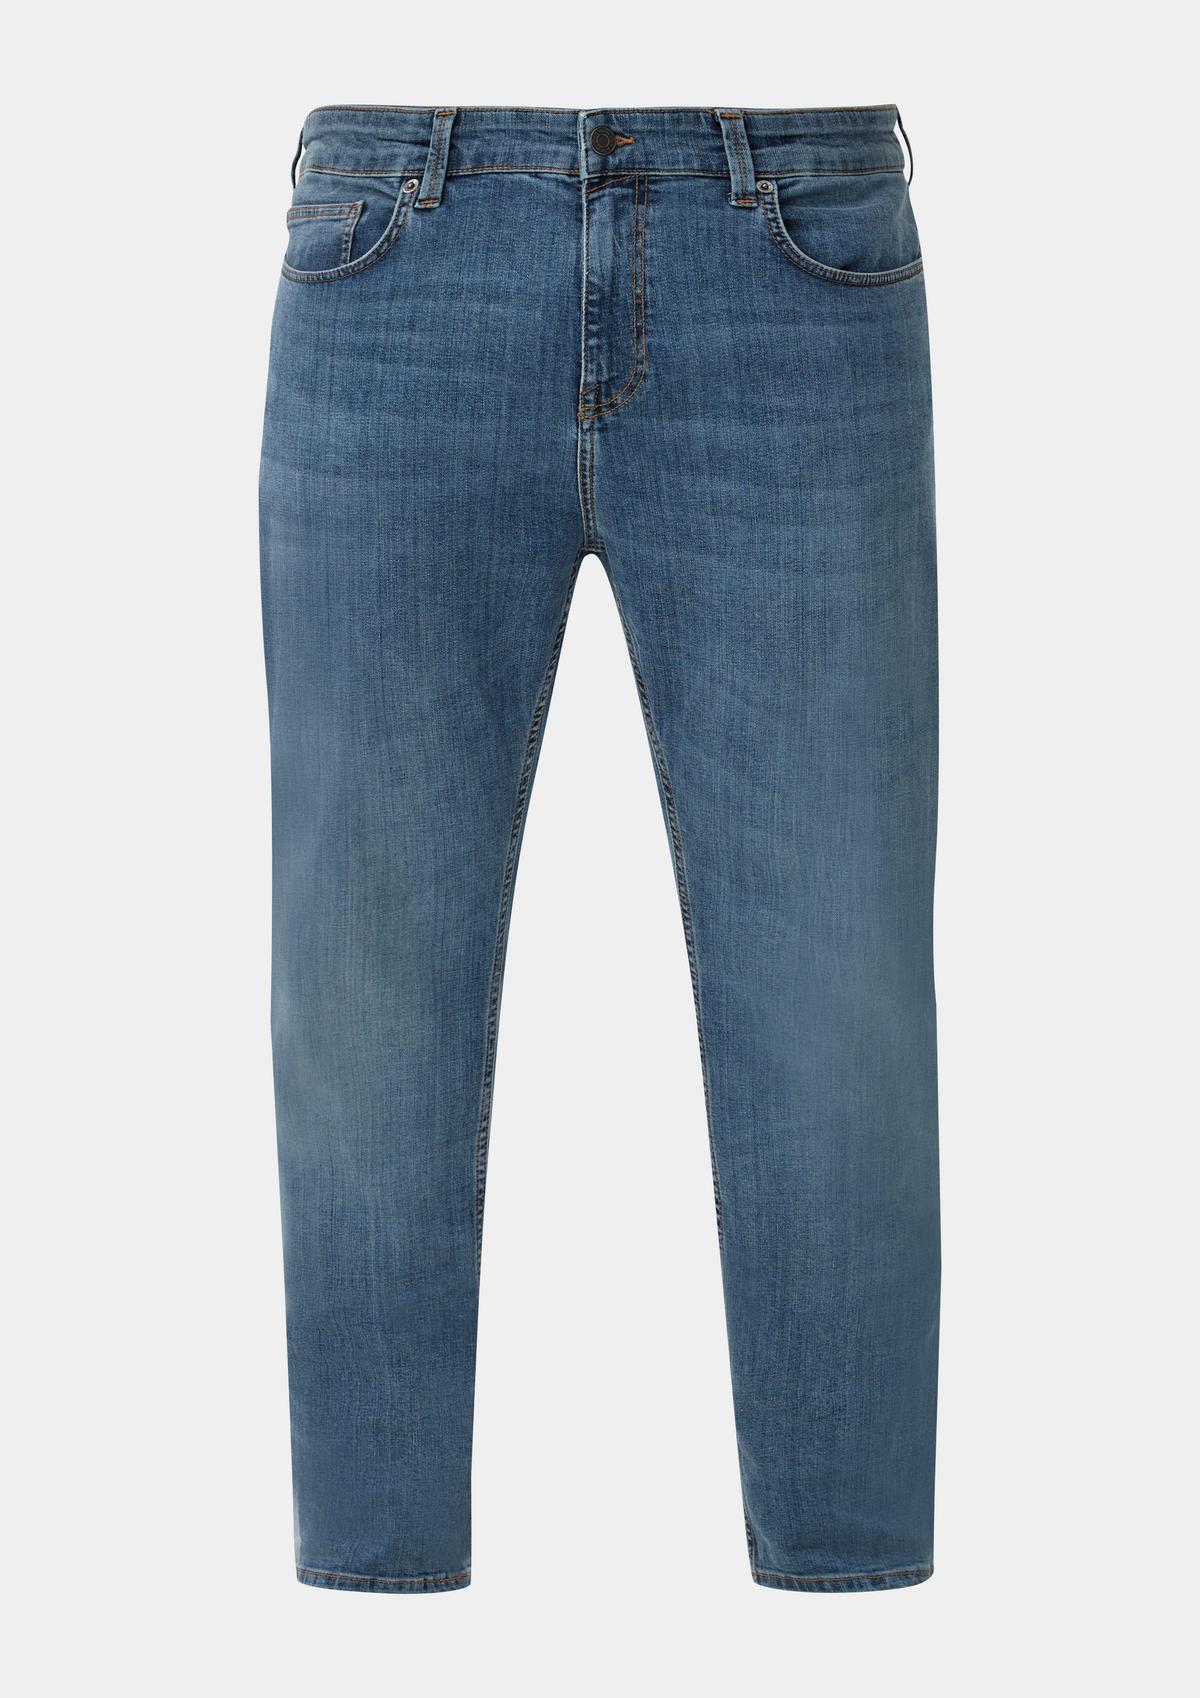 s.Oliver Casby: jeans hlače kroja Relaxed Fit